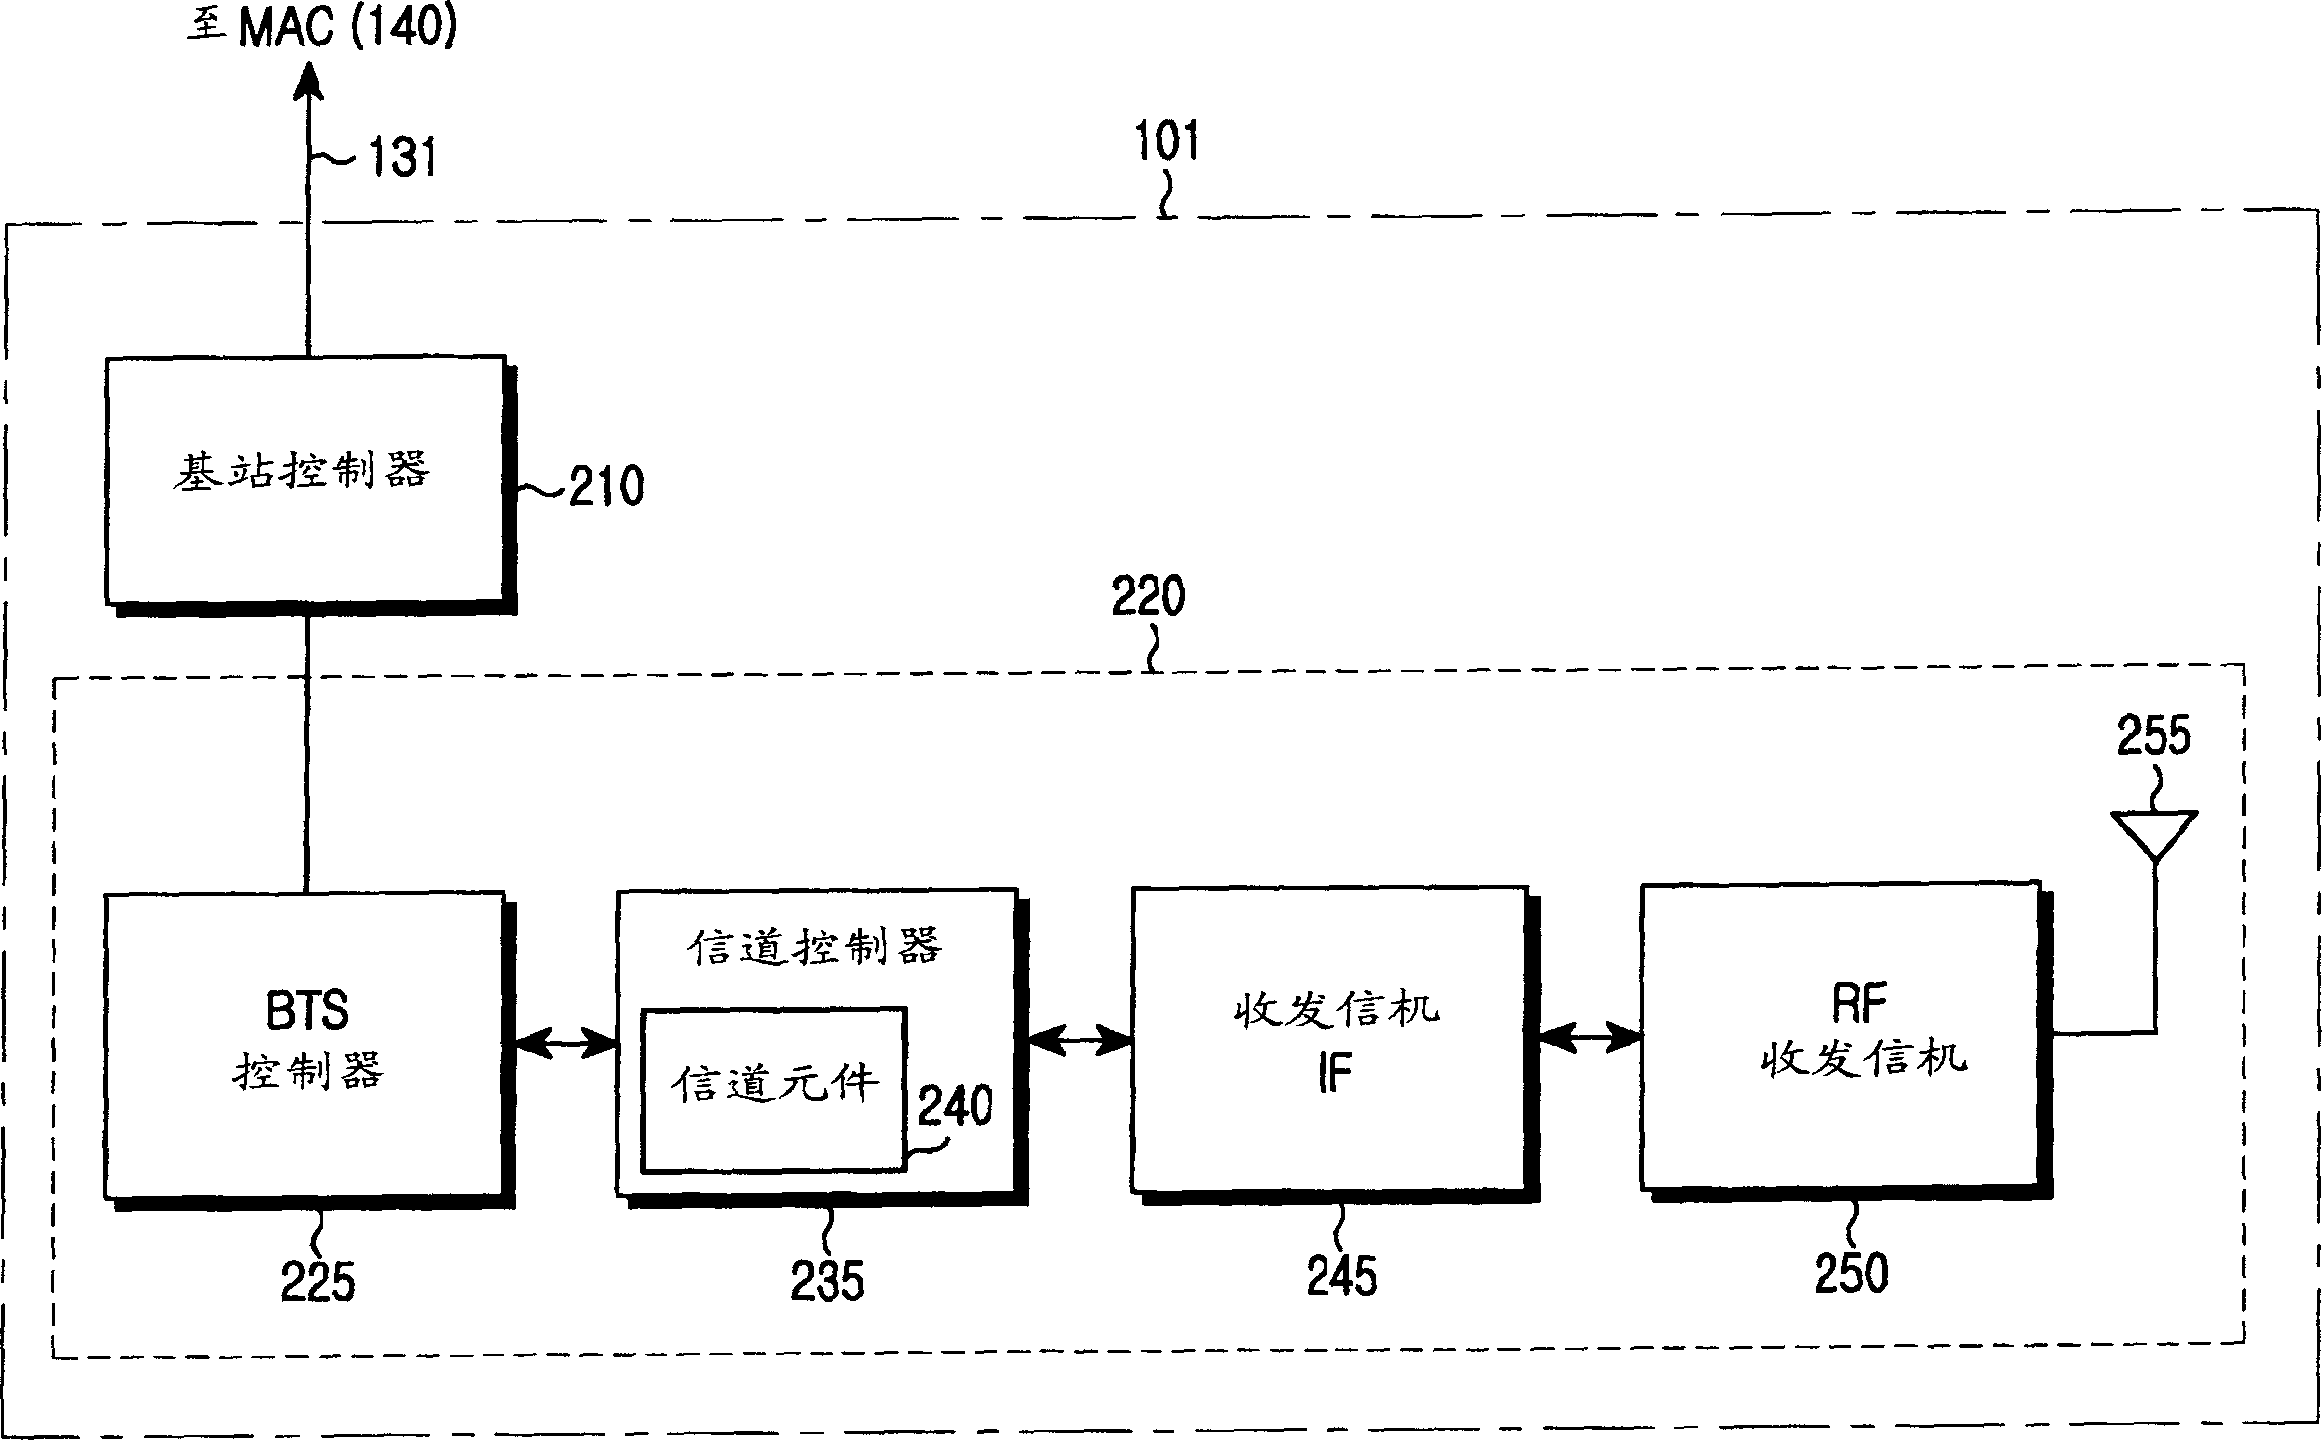 System and method for providing distributed treating element units in mobile communication network